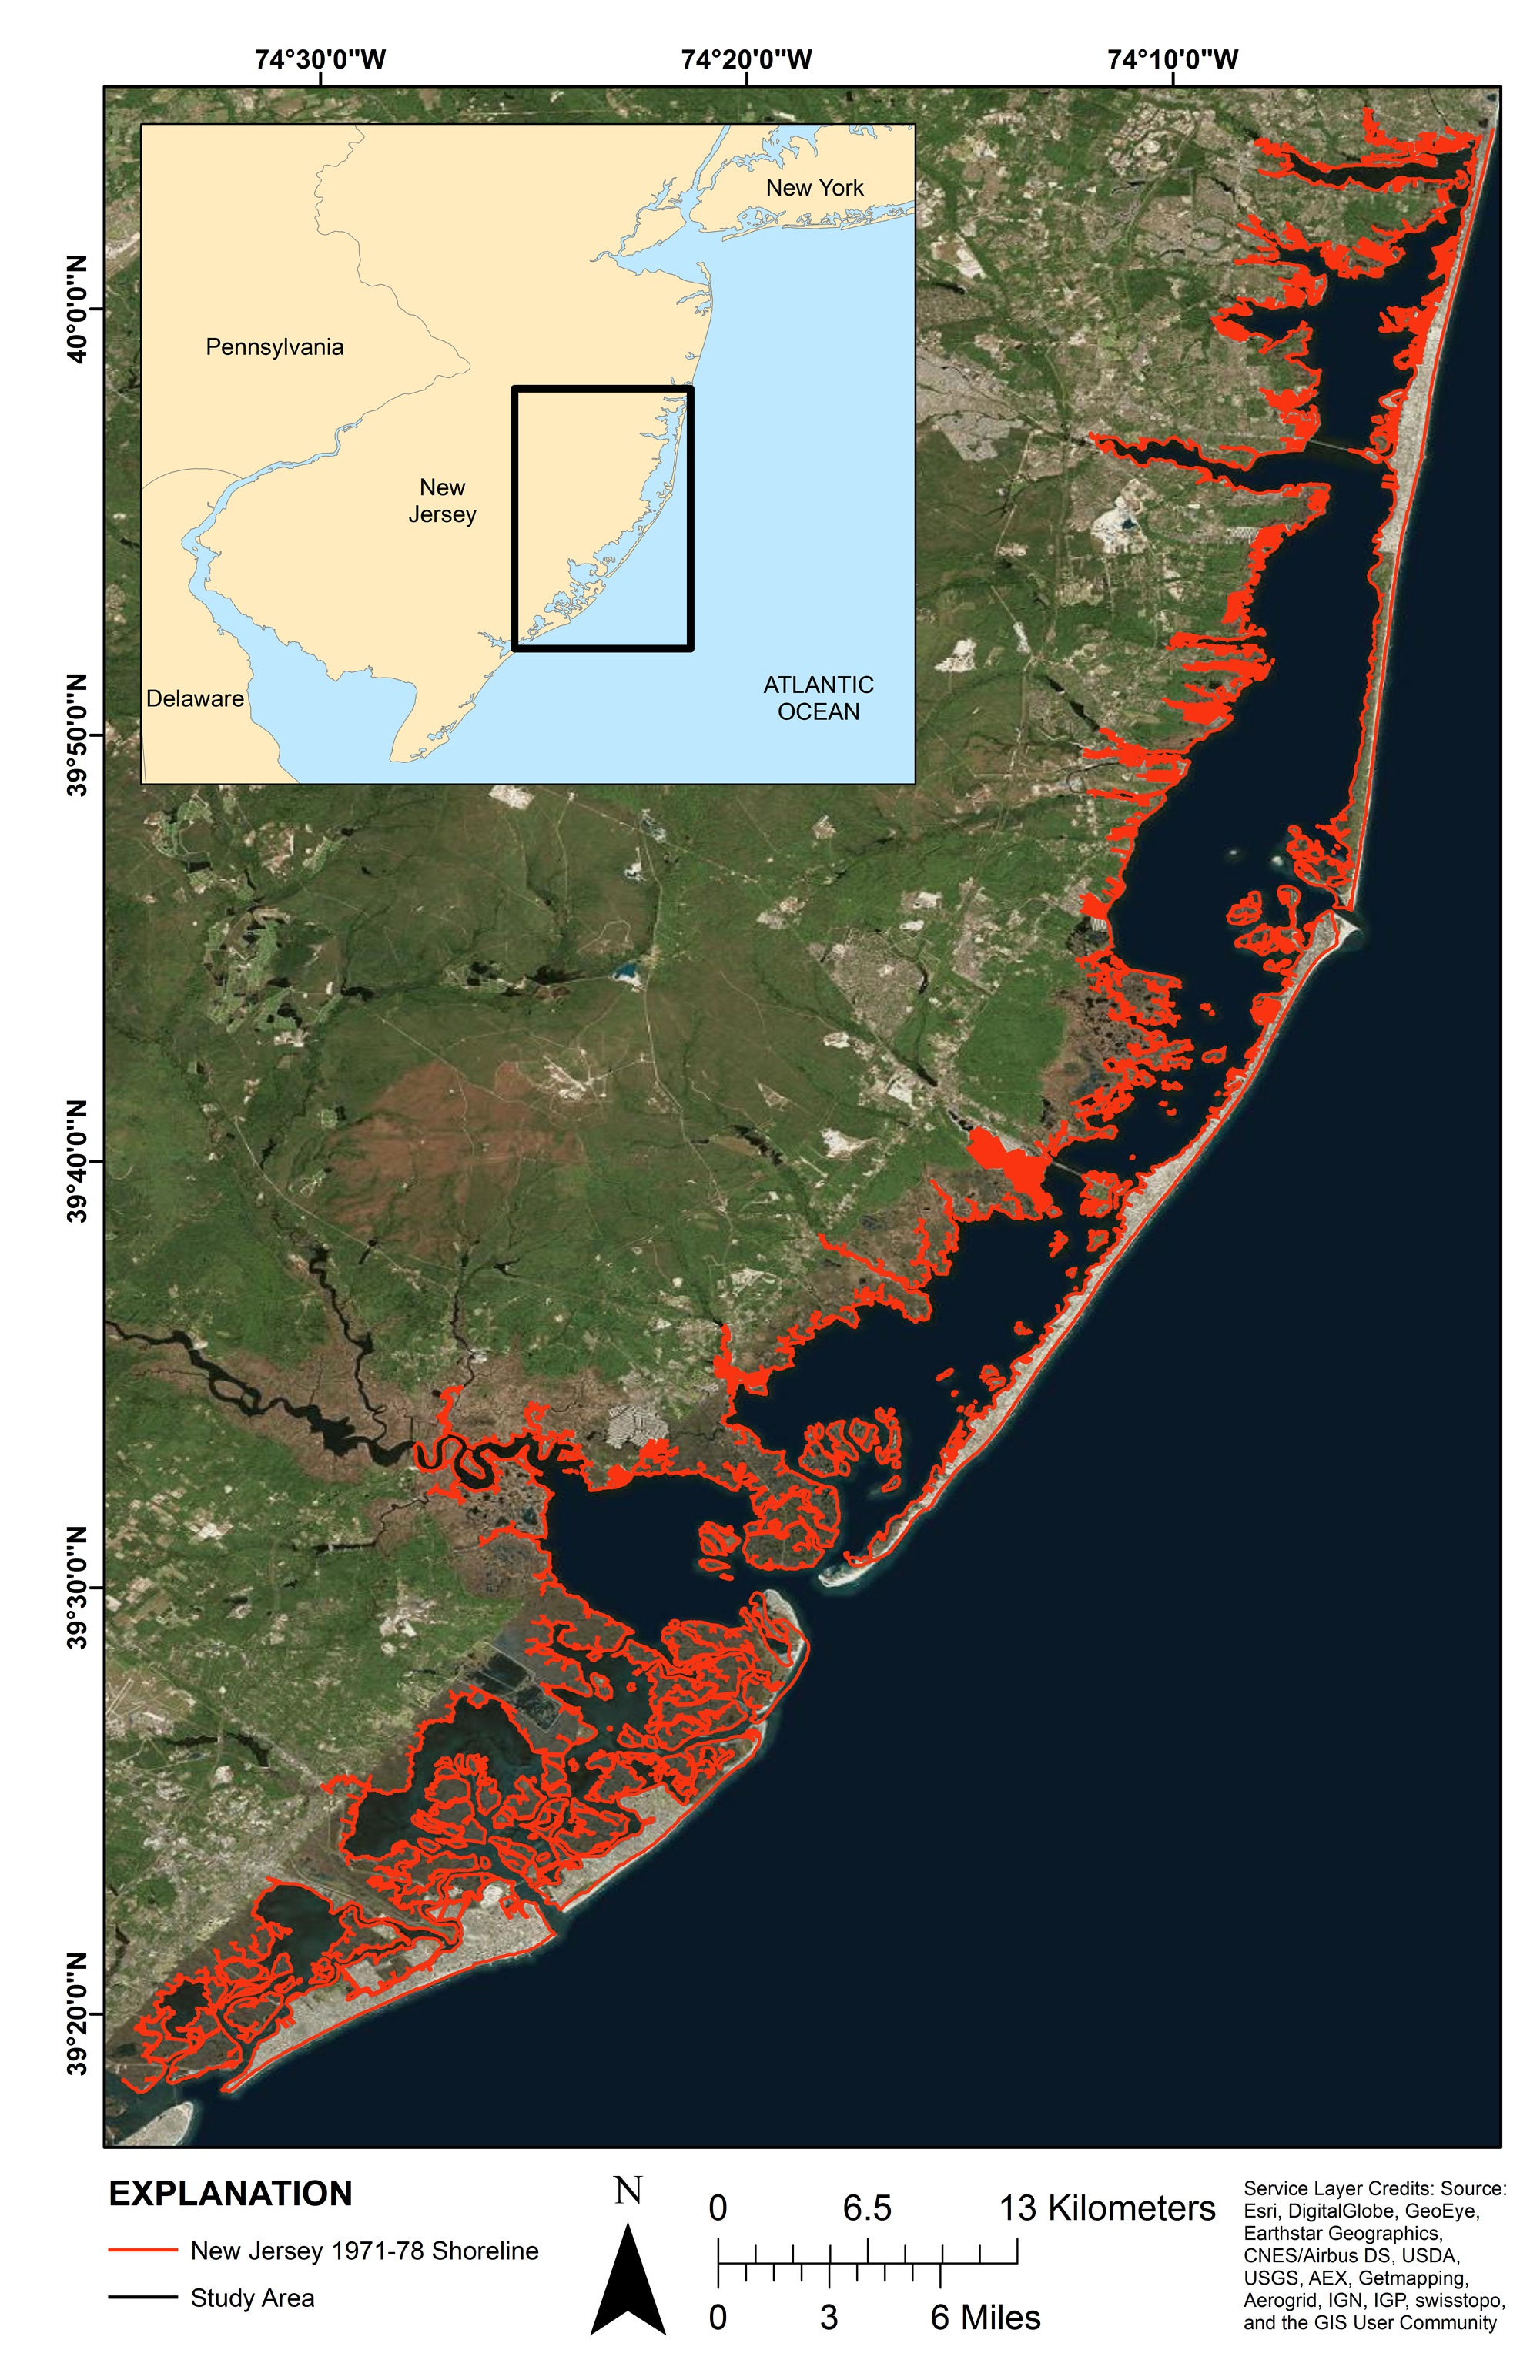 Labeled map showing the study area in New Jersey and the shoreline digitized from the NJDEP aerial images, with inset map of area.